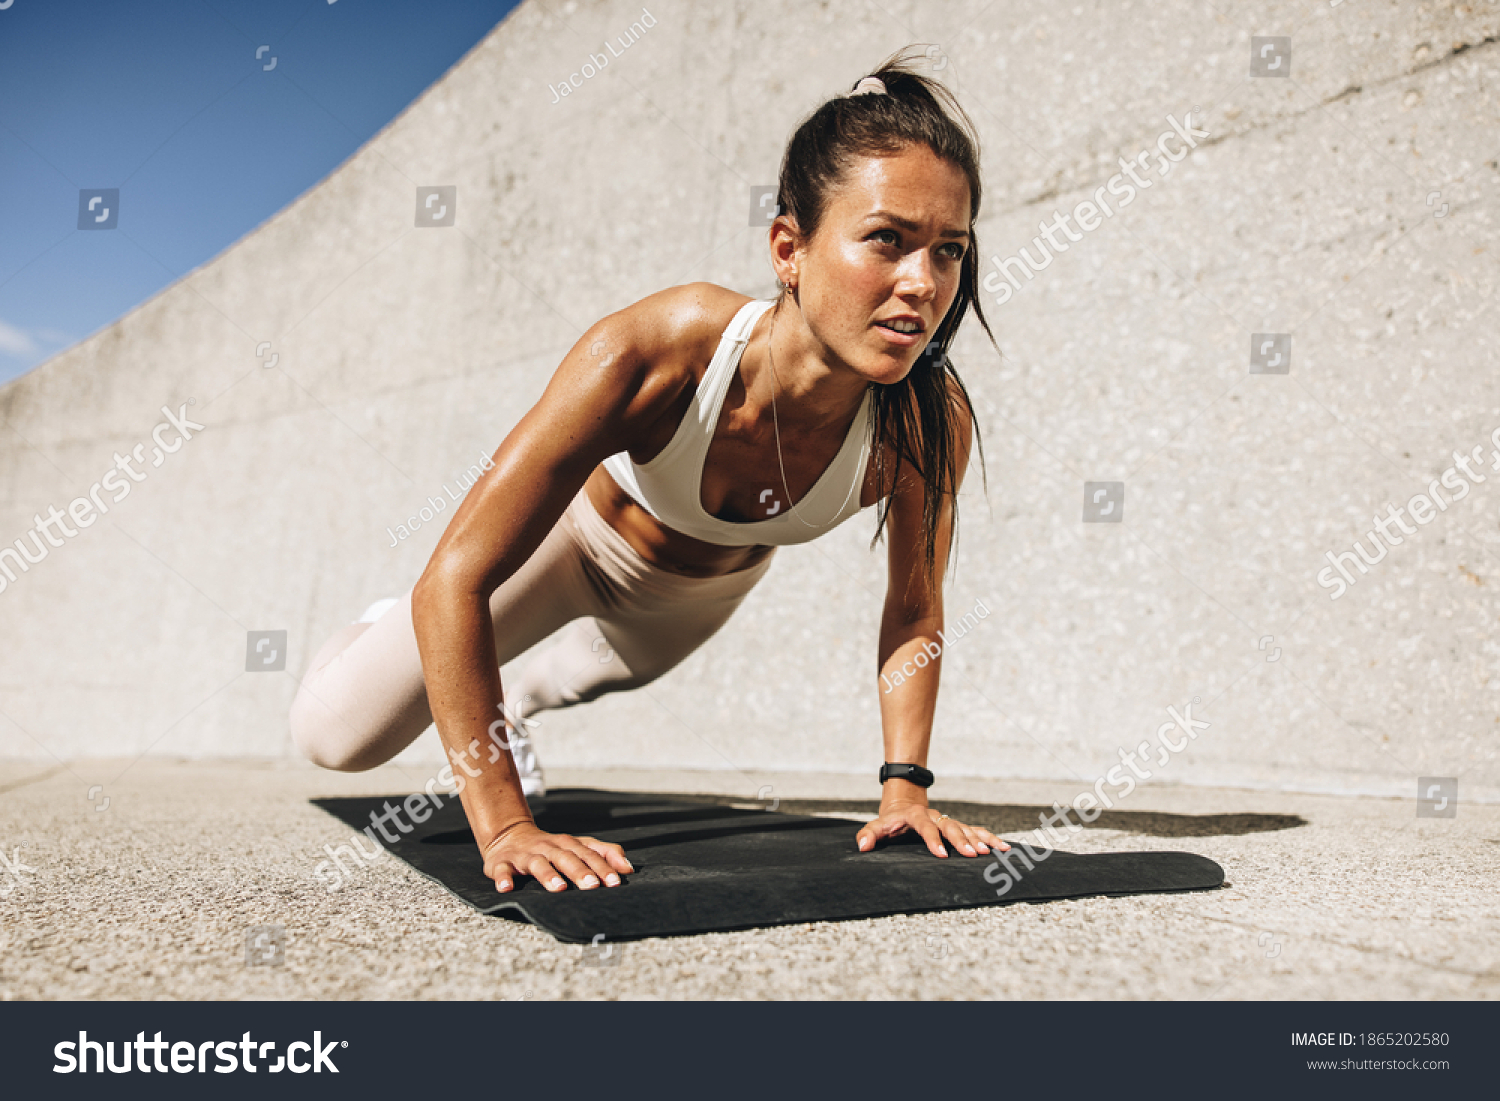 Fitness woman doing wide mountain climbers exercise. Female in sportswear exercising on fitness mat outdoors. #1865202580